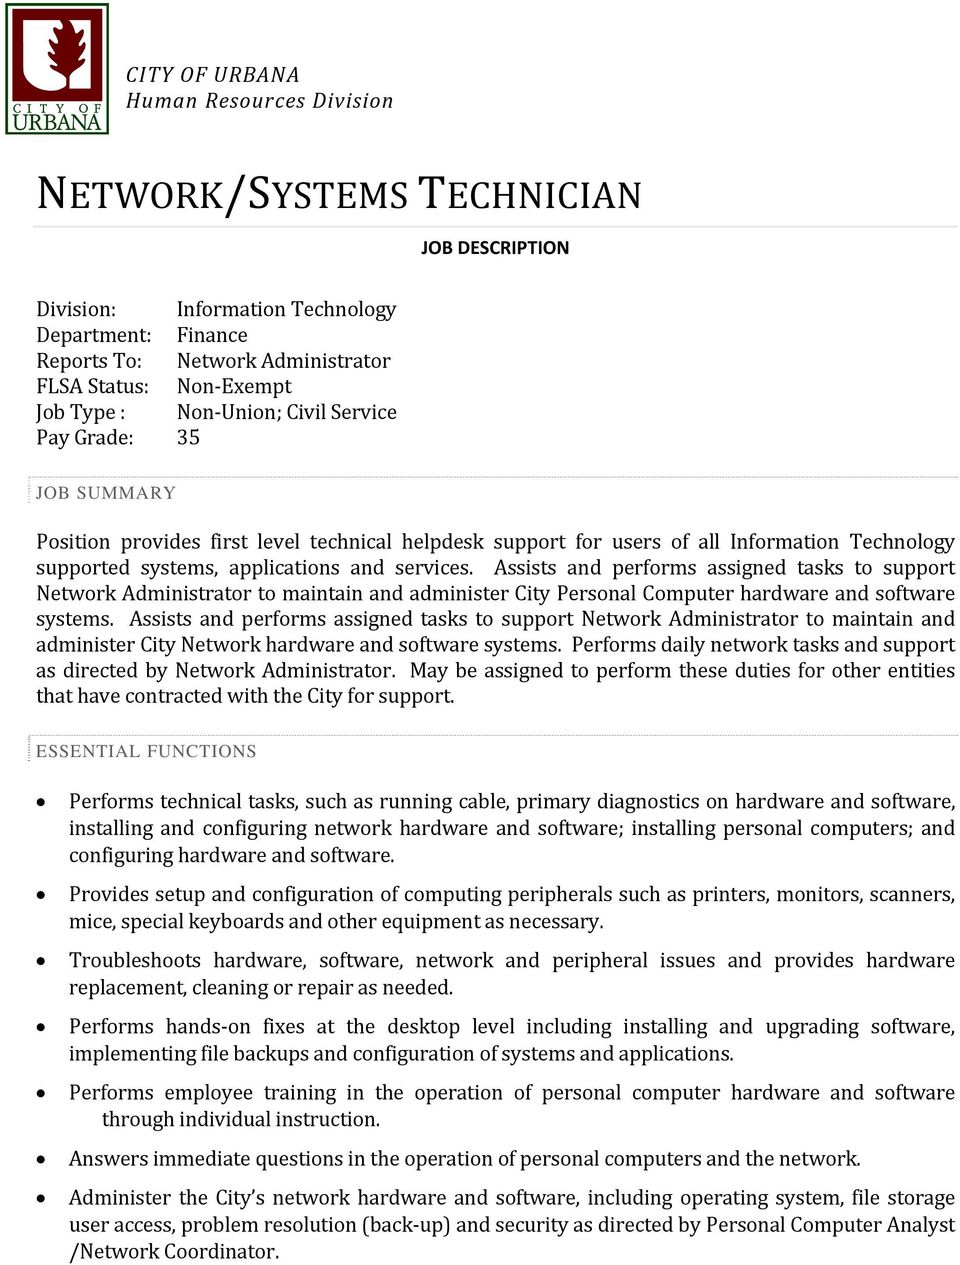 Assists and performs assigned tasks to support Network Administrator to maintain and administer City Personal Computer hardware and software systems.